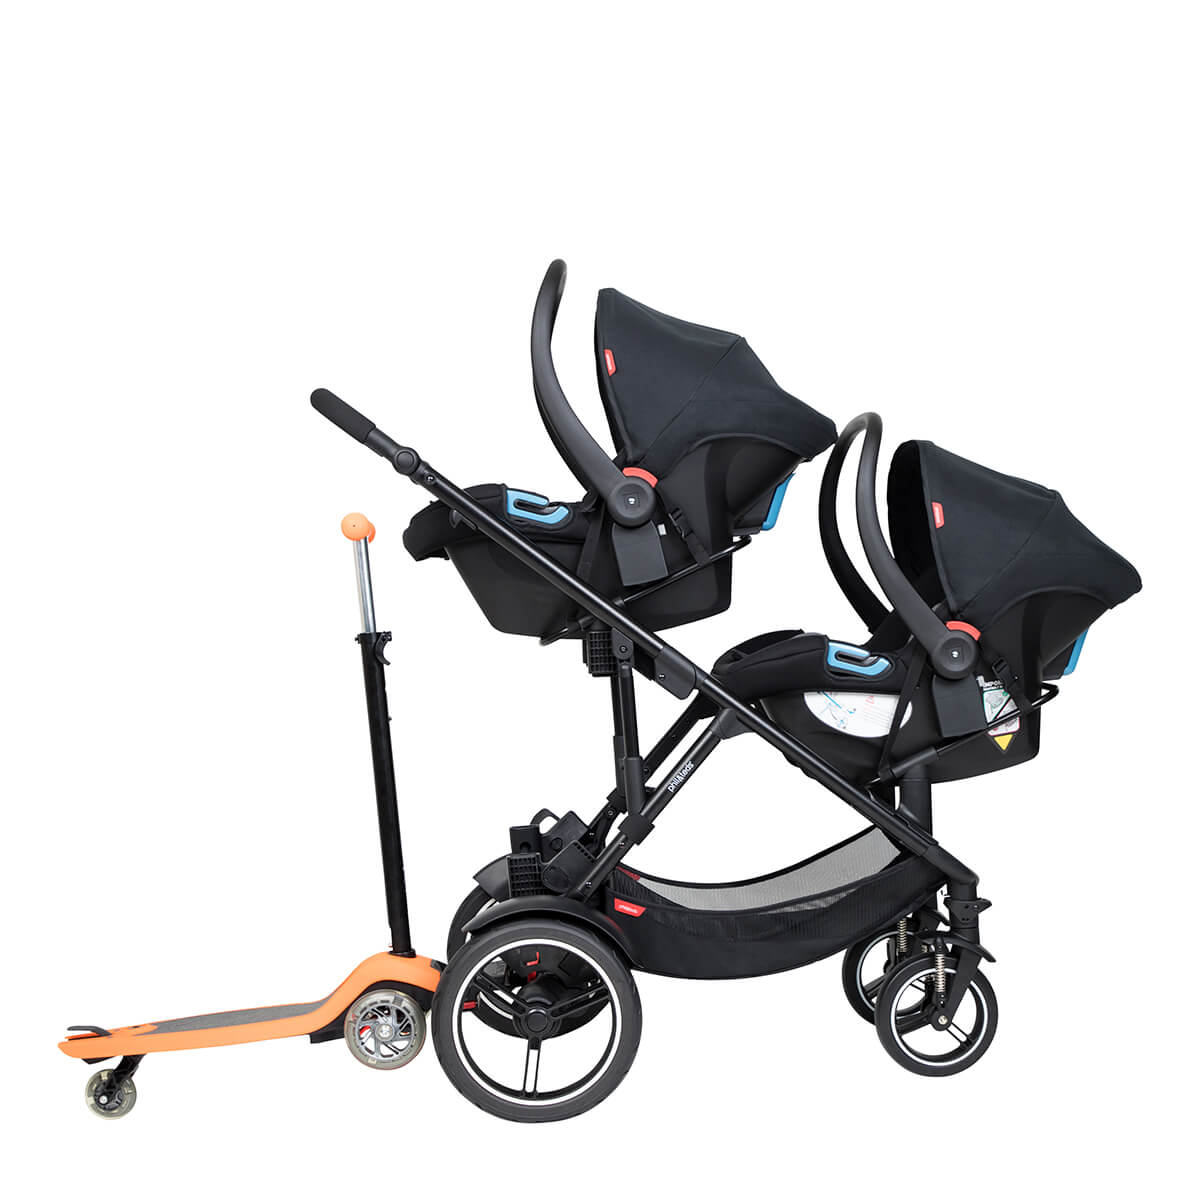 https://cdn.accentuate.io/8582364365139/19272835367000/philteds-voyager-buggy-with-double-travel-systems-and-freerider-stroller-board-in-the-rear-v1700698749721.jpg?1200x1200